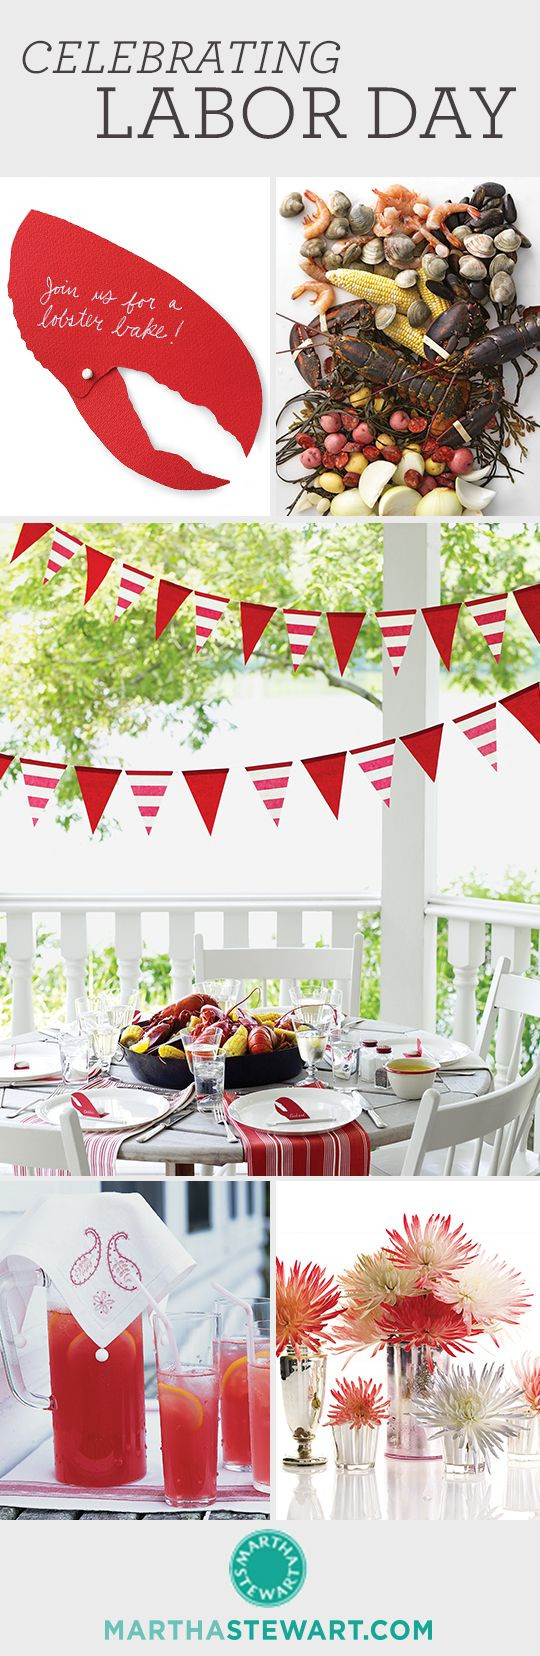 Labor Day Decoration Ideas
 Celebrate Labor Day with our invitations decor ideas and